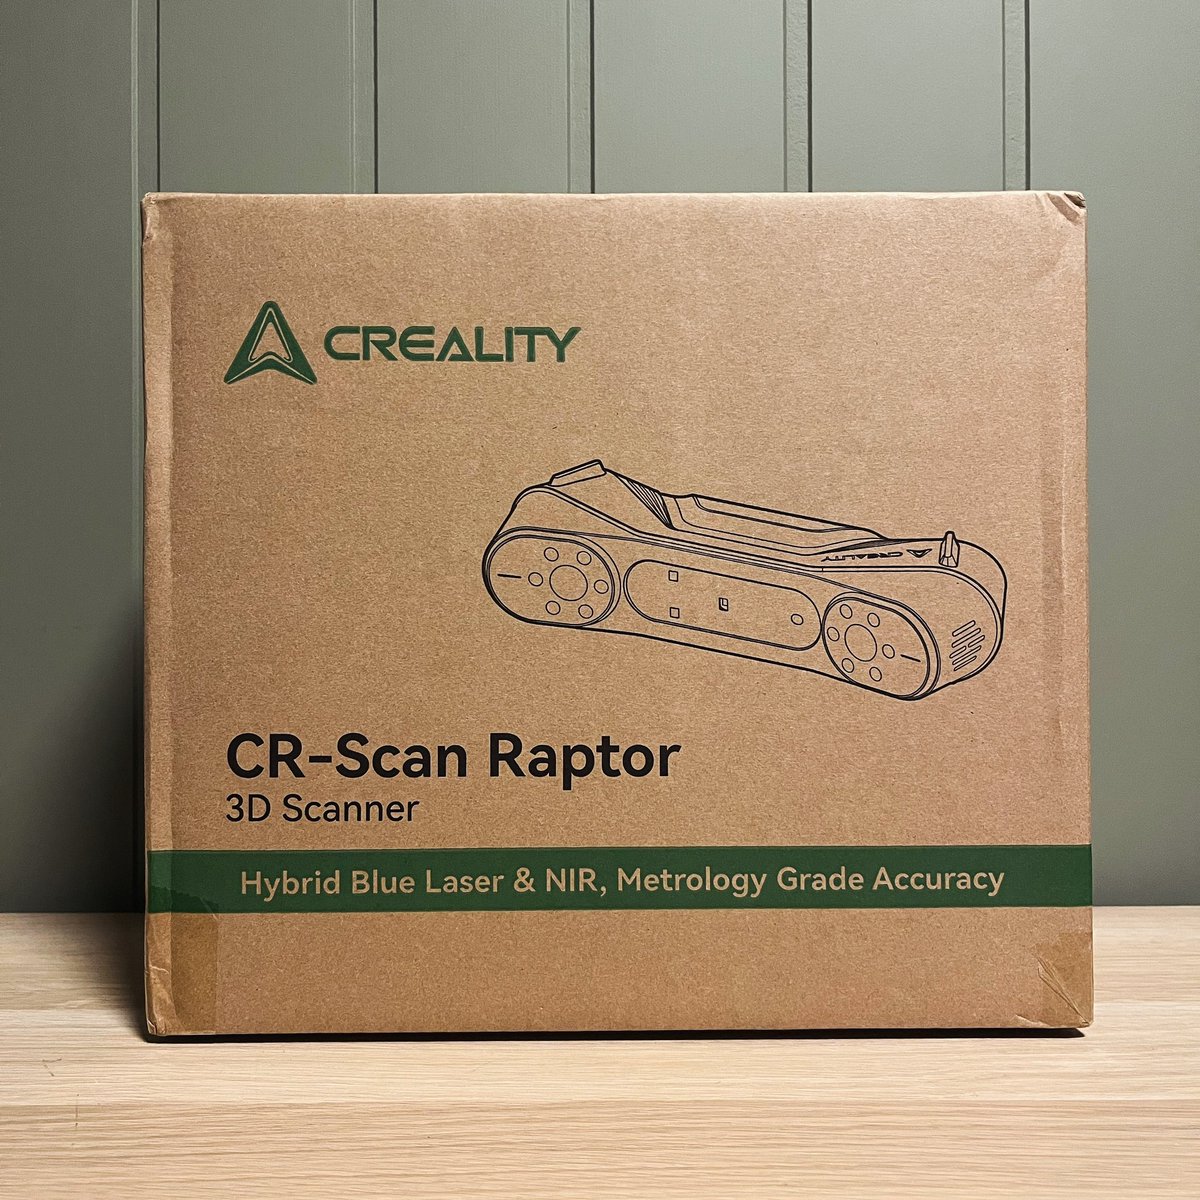 Bought the @Creality3dP #raptor to review and hopefully use for local projects! This has the potential to be this years most exciting #3dscanner!   Here’s my thoughts pre-purchase/use:  antonmansson.com/3d-printing-bl…